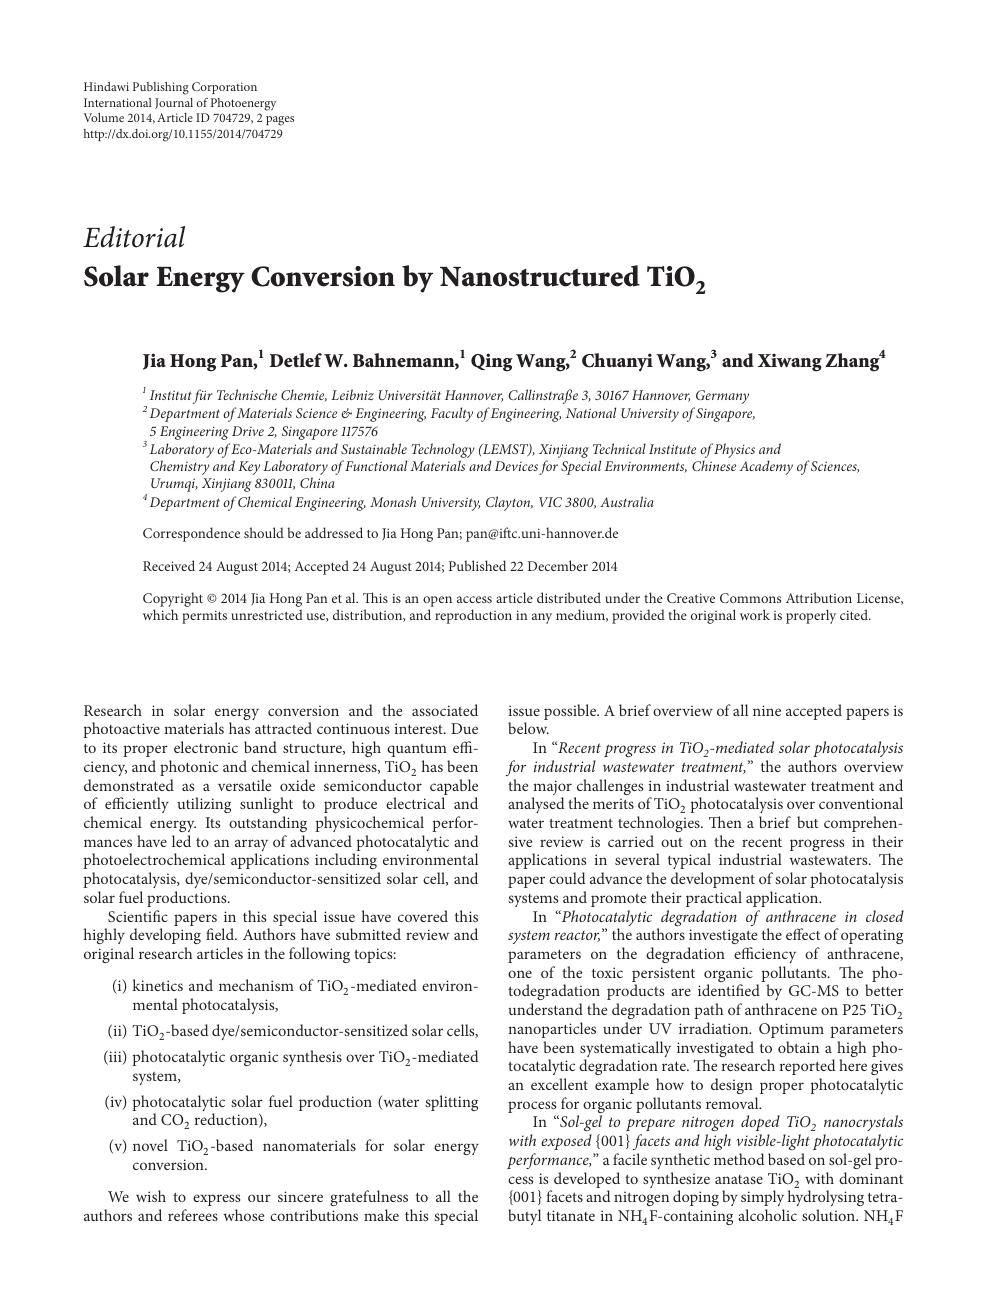 latest research paper on solar energy